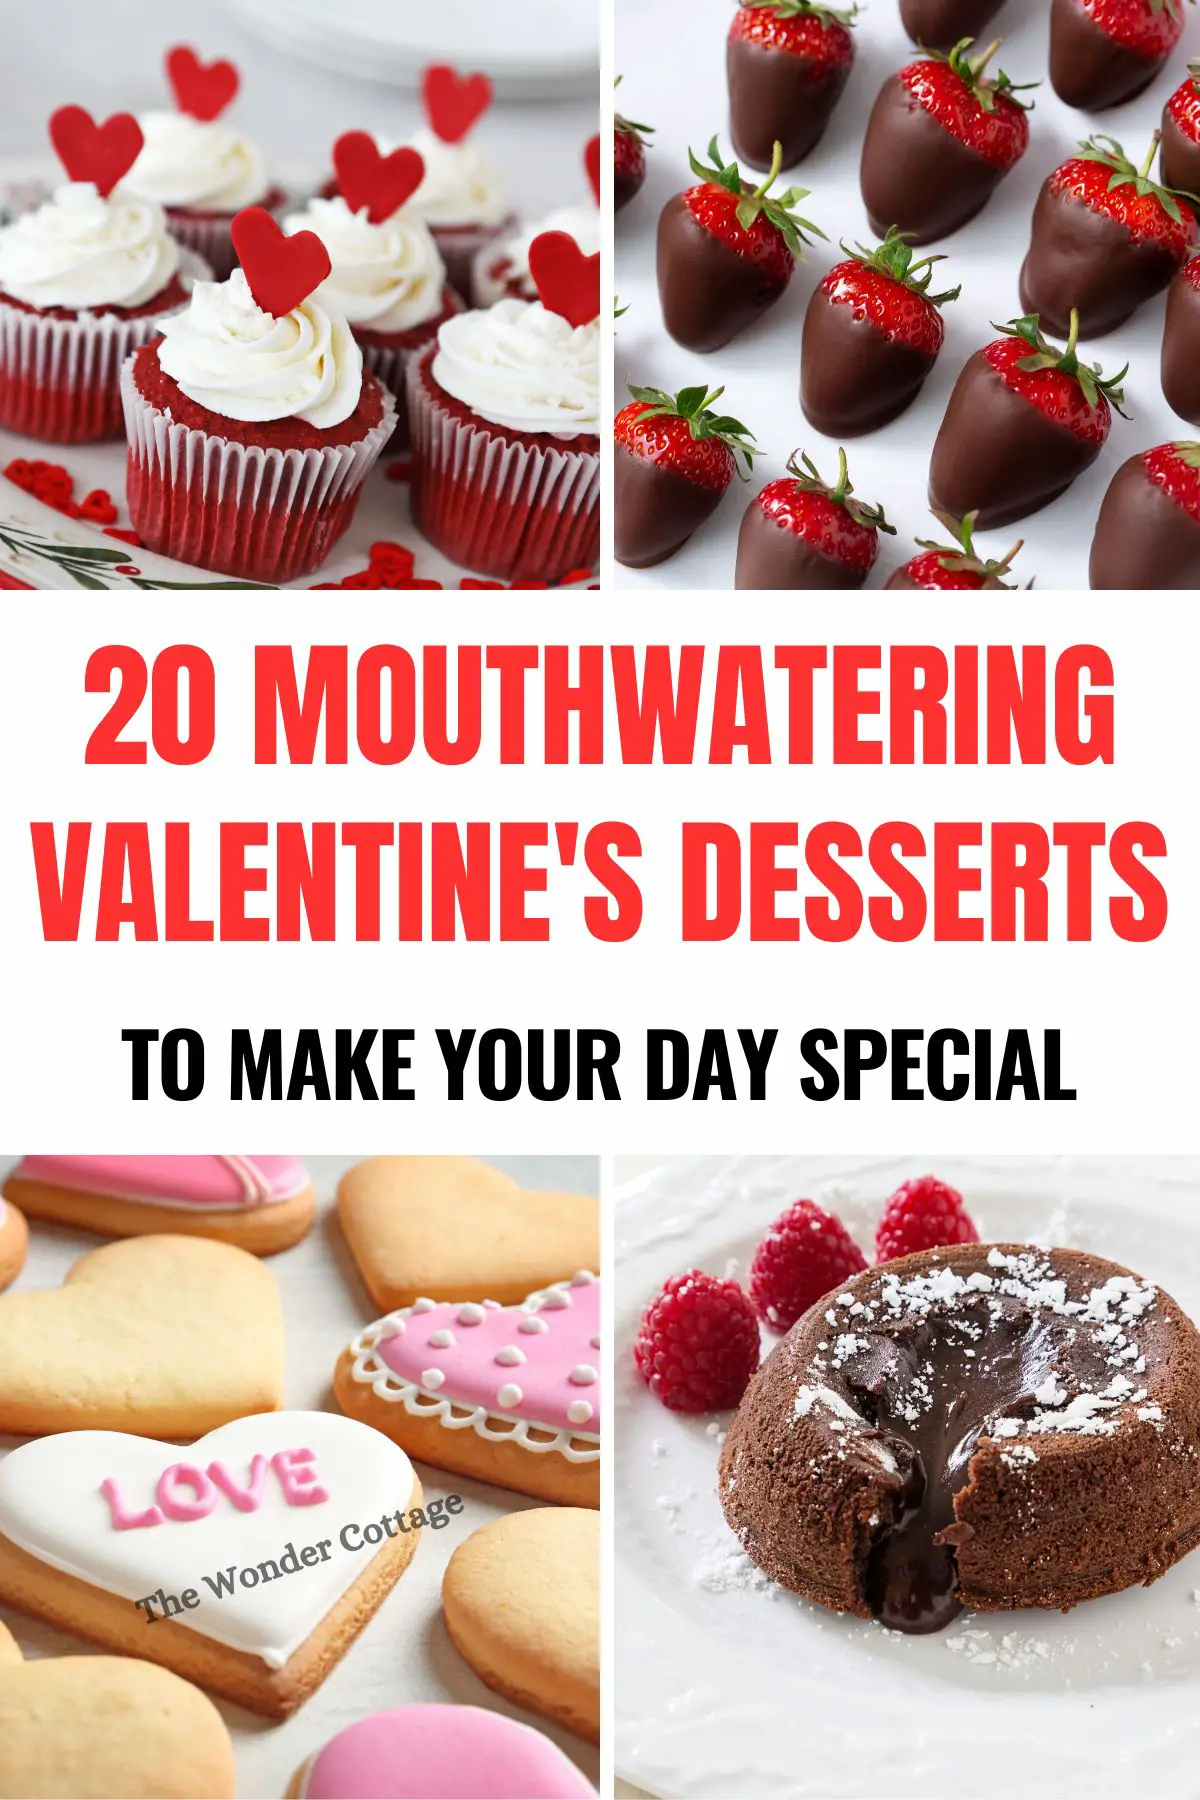 Mouthwatering Valentine's Desserts To Make Your Day Special